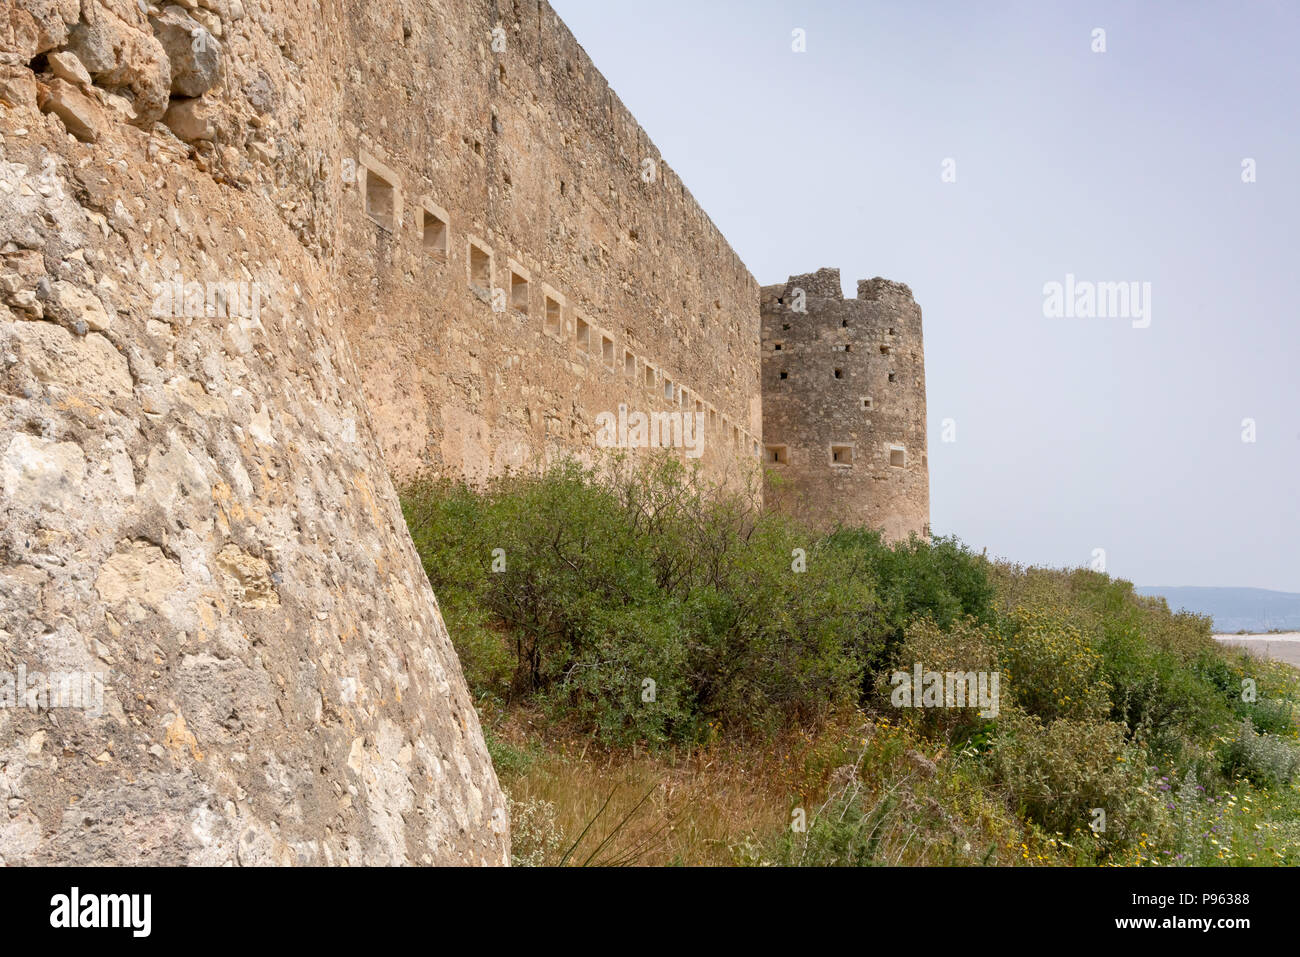 Ottoman Fortress known as 'Koules of Aptera' or 'Fortress of Sousbasiat' at Aptera on the island of Crete, Greece Stock Photo